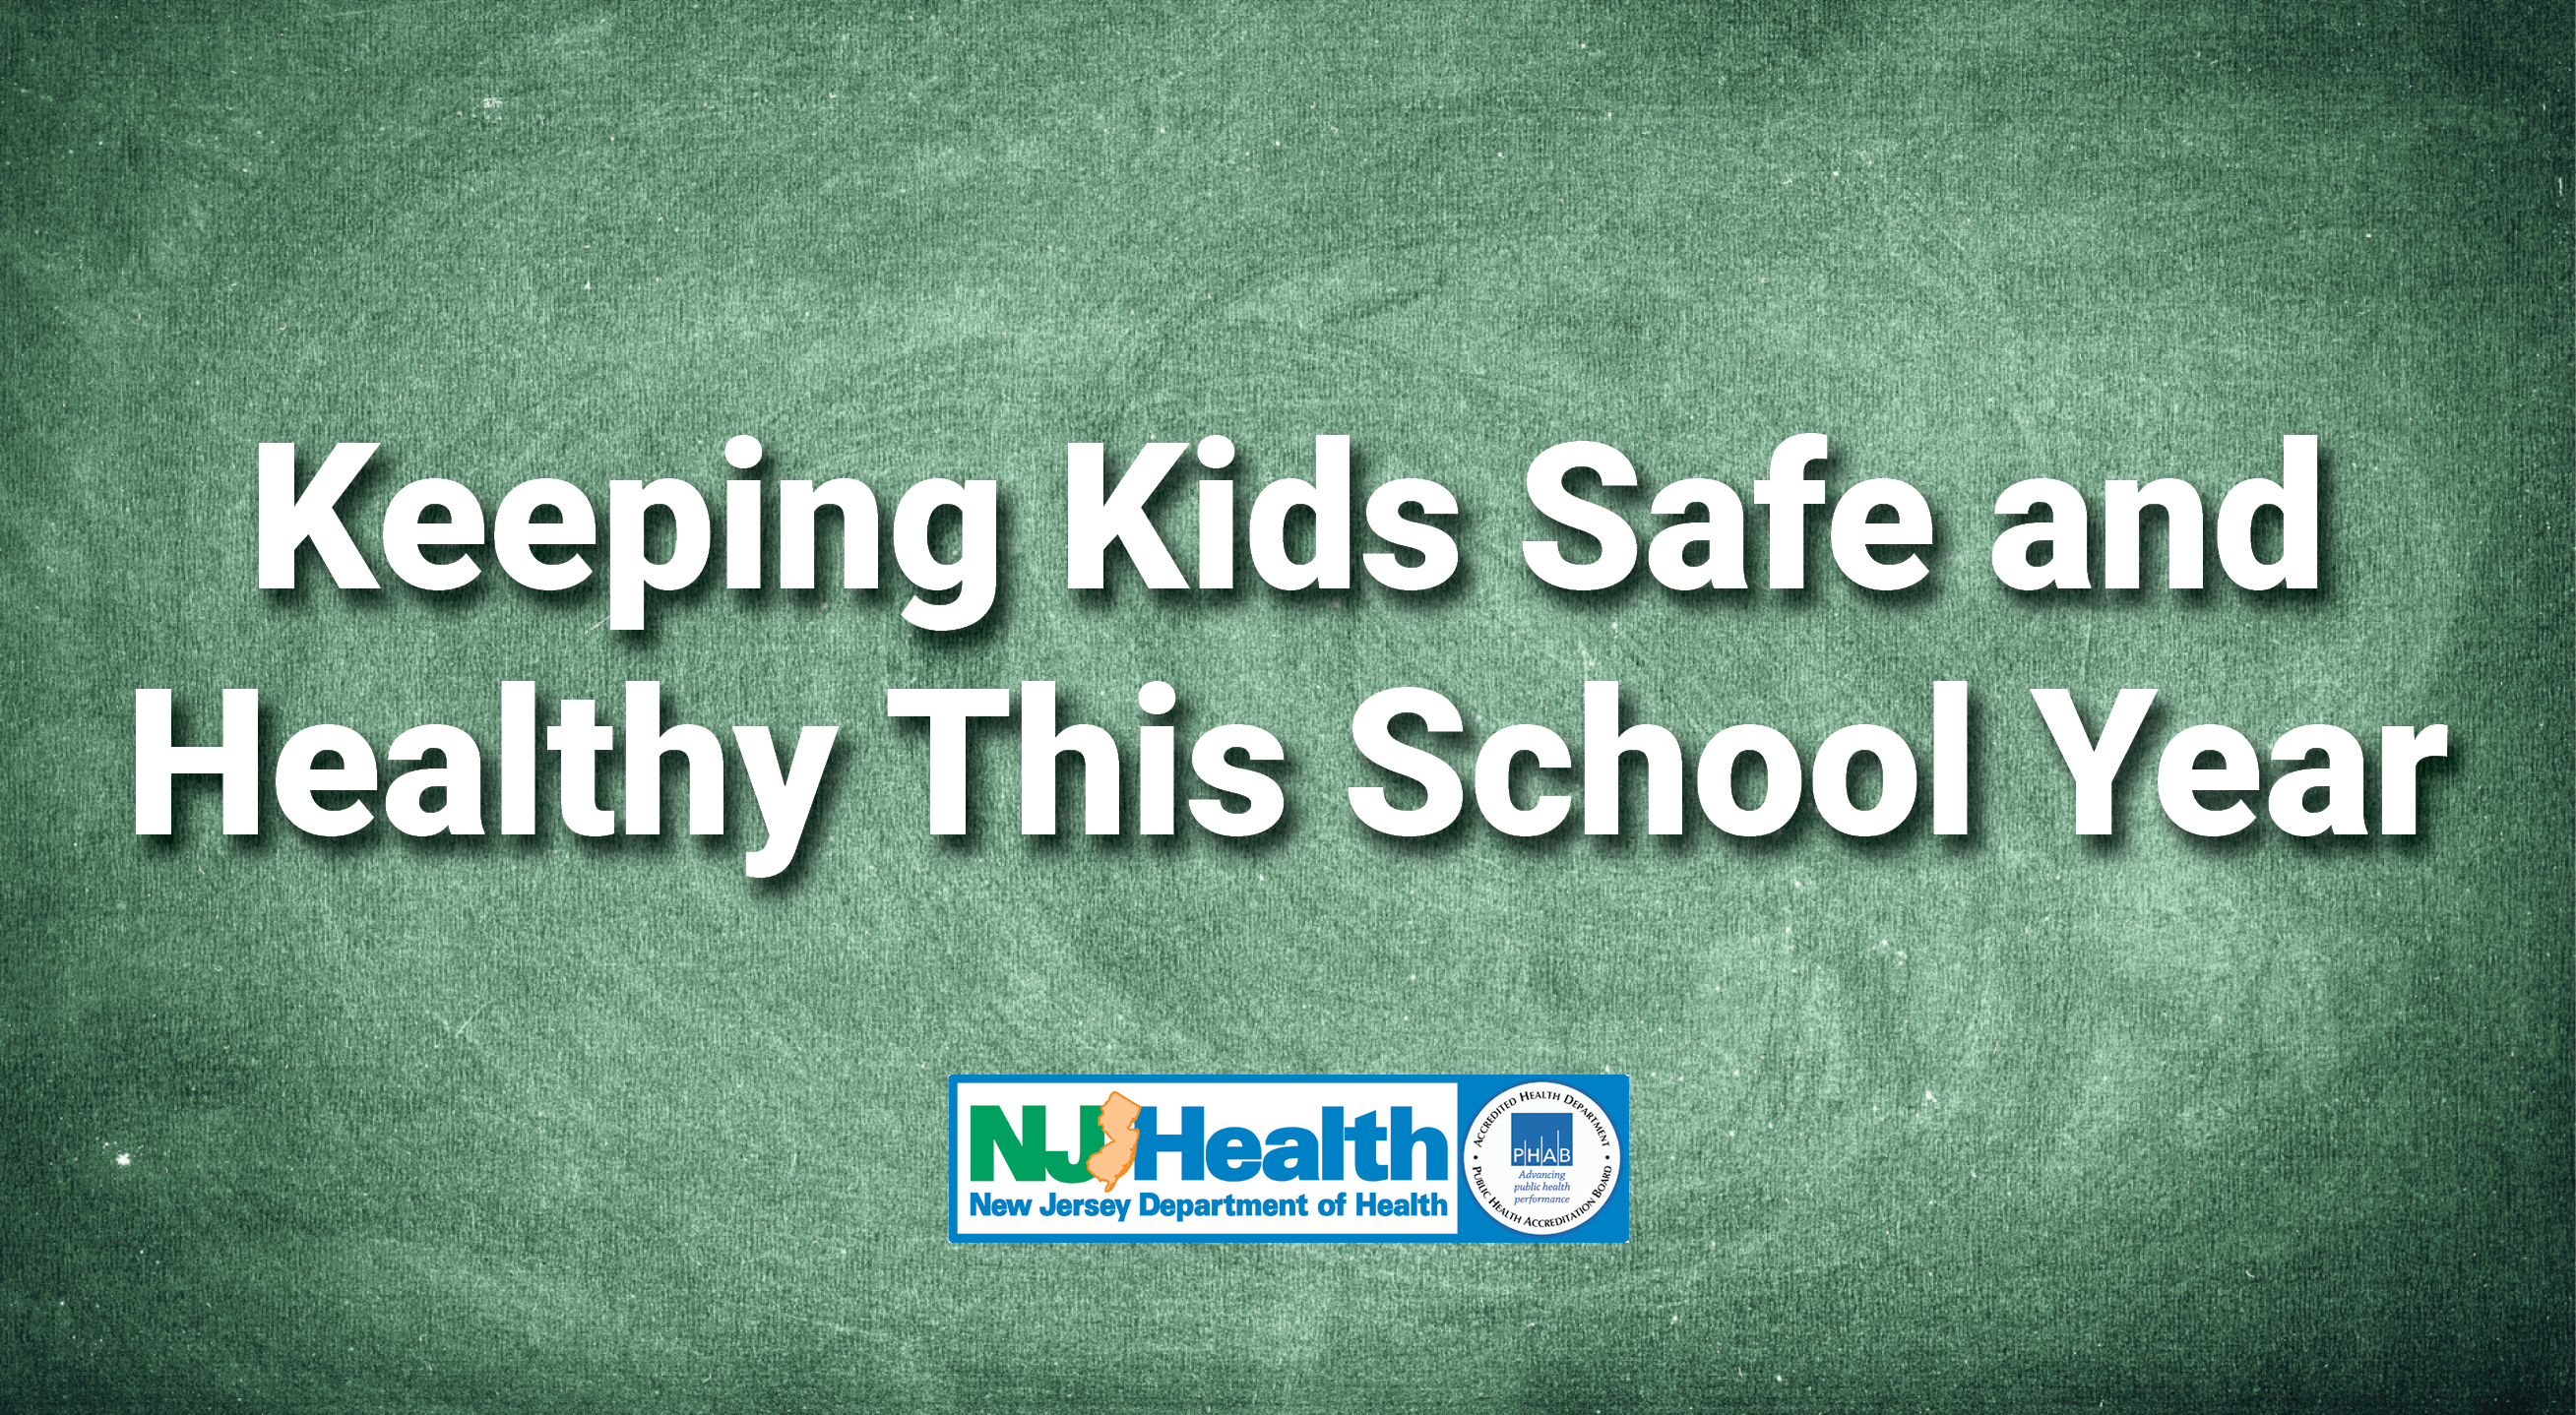 Keeping Kids Safe and Healthy This School Year